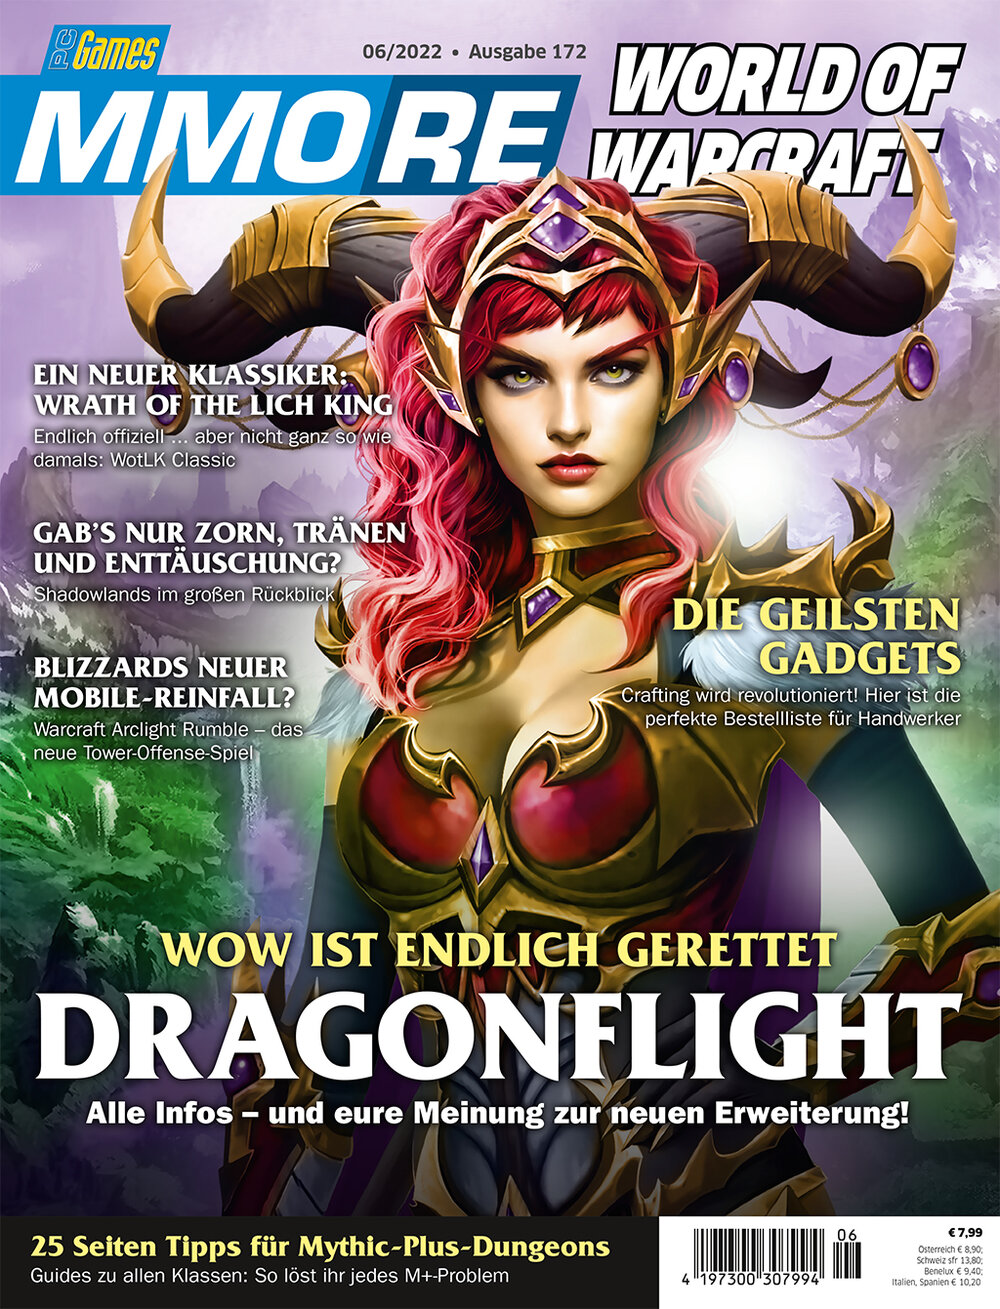 PC Games MMORE ePaper 06/2022